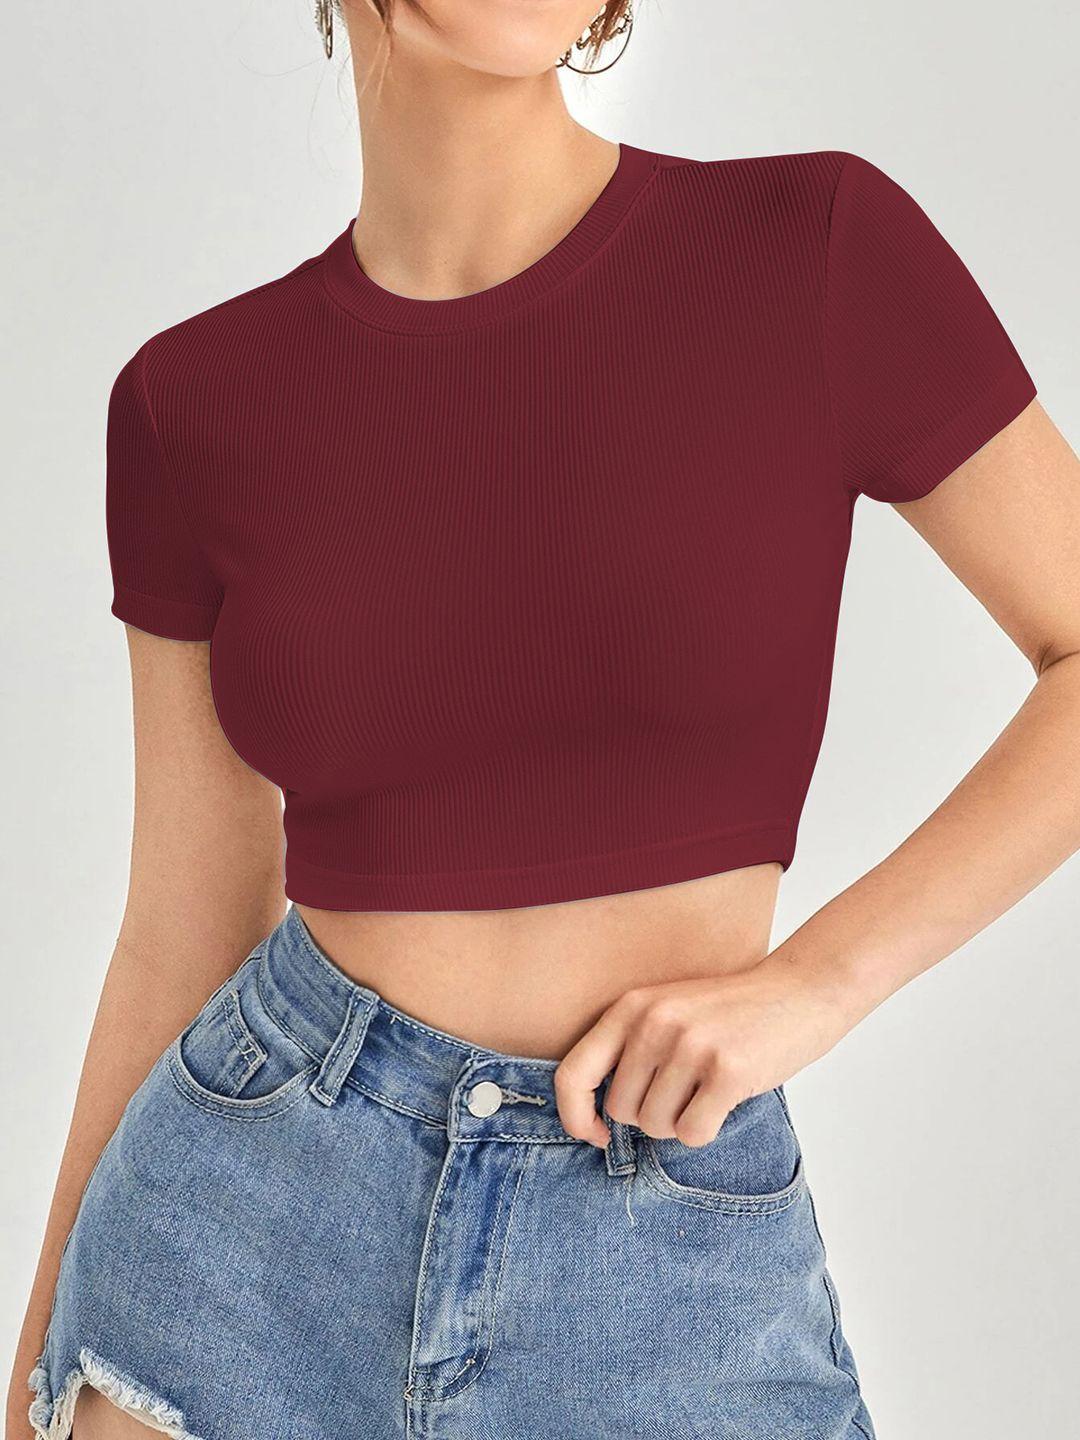 stylecast x slyck round neck ribbed fitted crop top